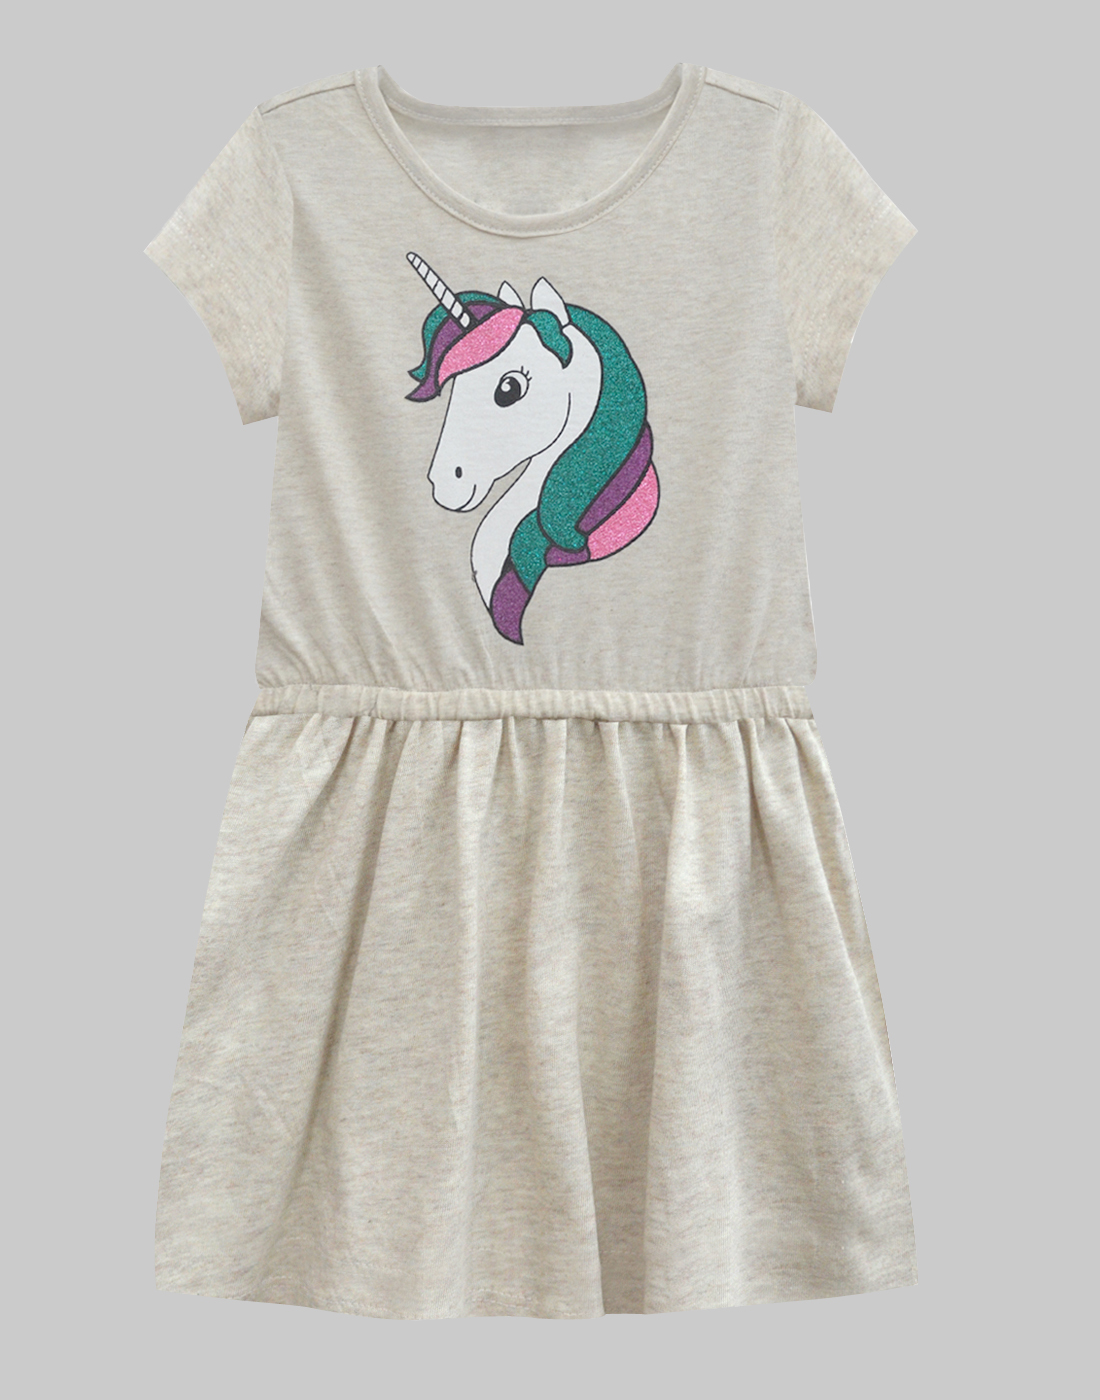 NEW Unicorn Dress for girls perfect for birthday parties. Spring & Summer  dress | eBay